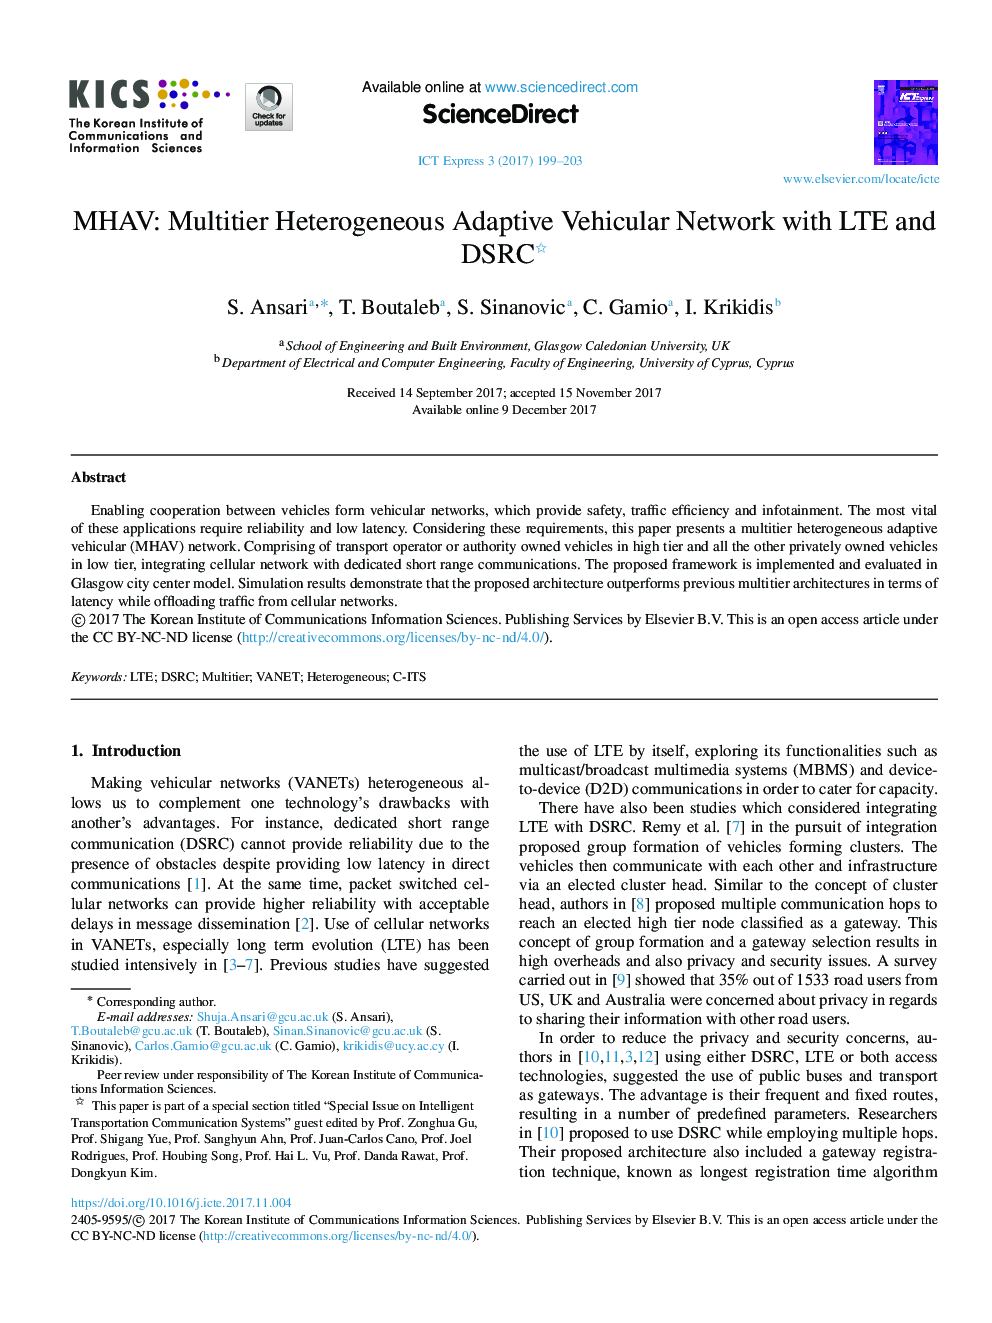 MHAV: Multitier Heterogeneous Adaptive Vehicular Network with LTE and DSRC